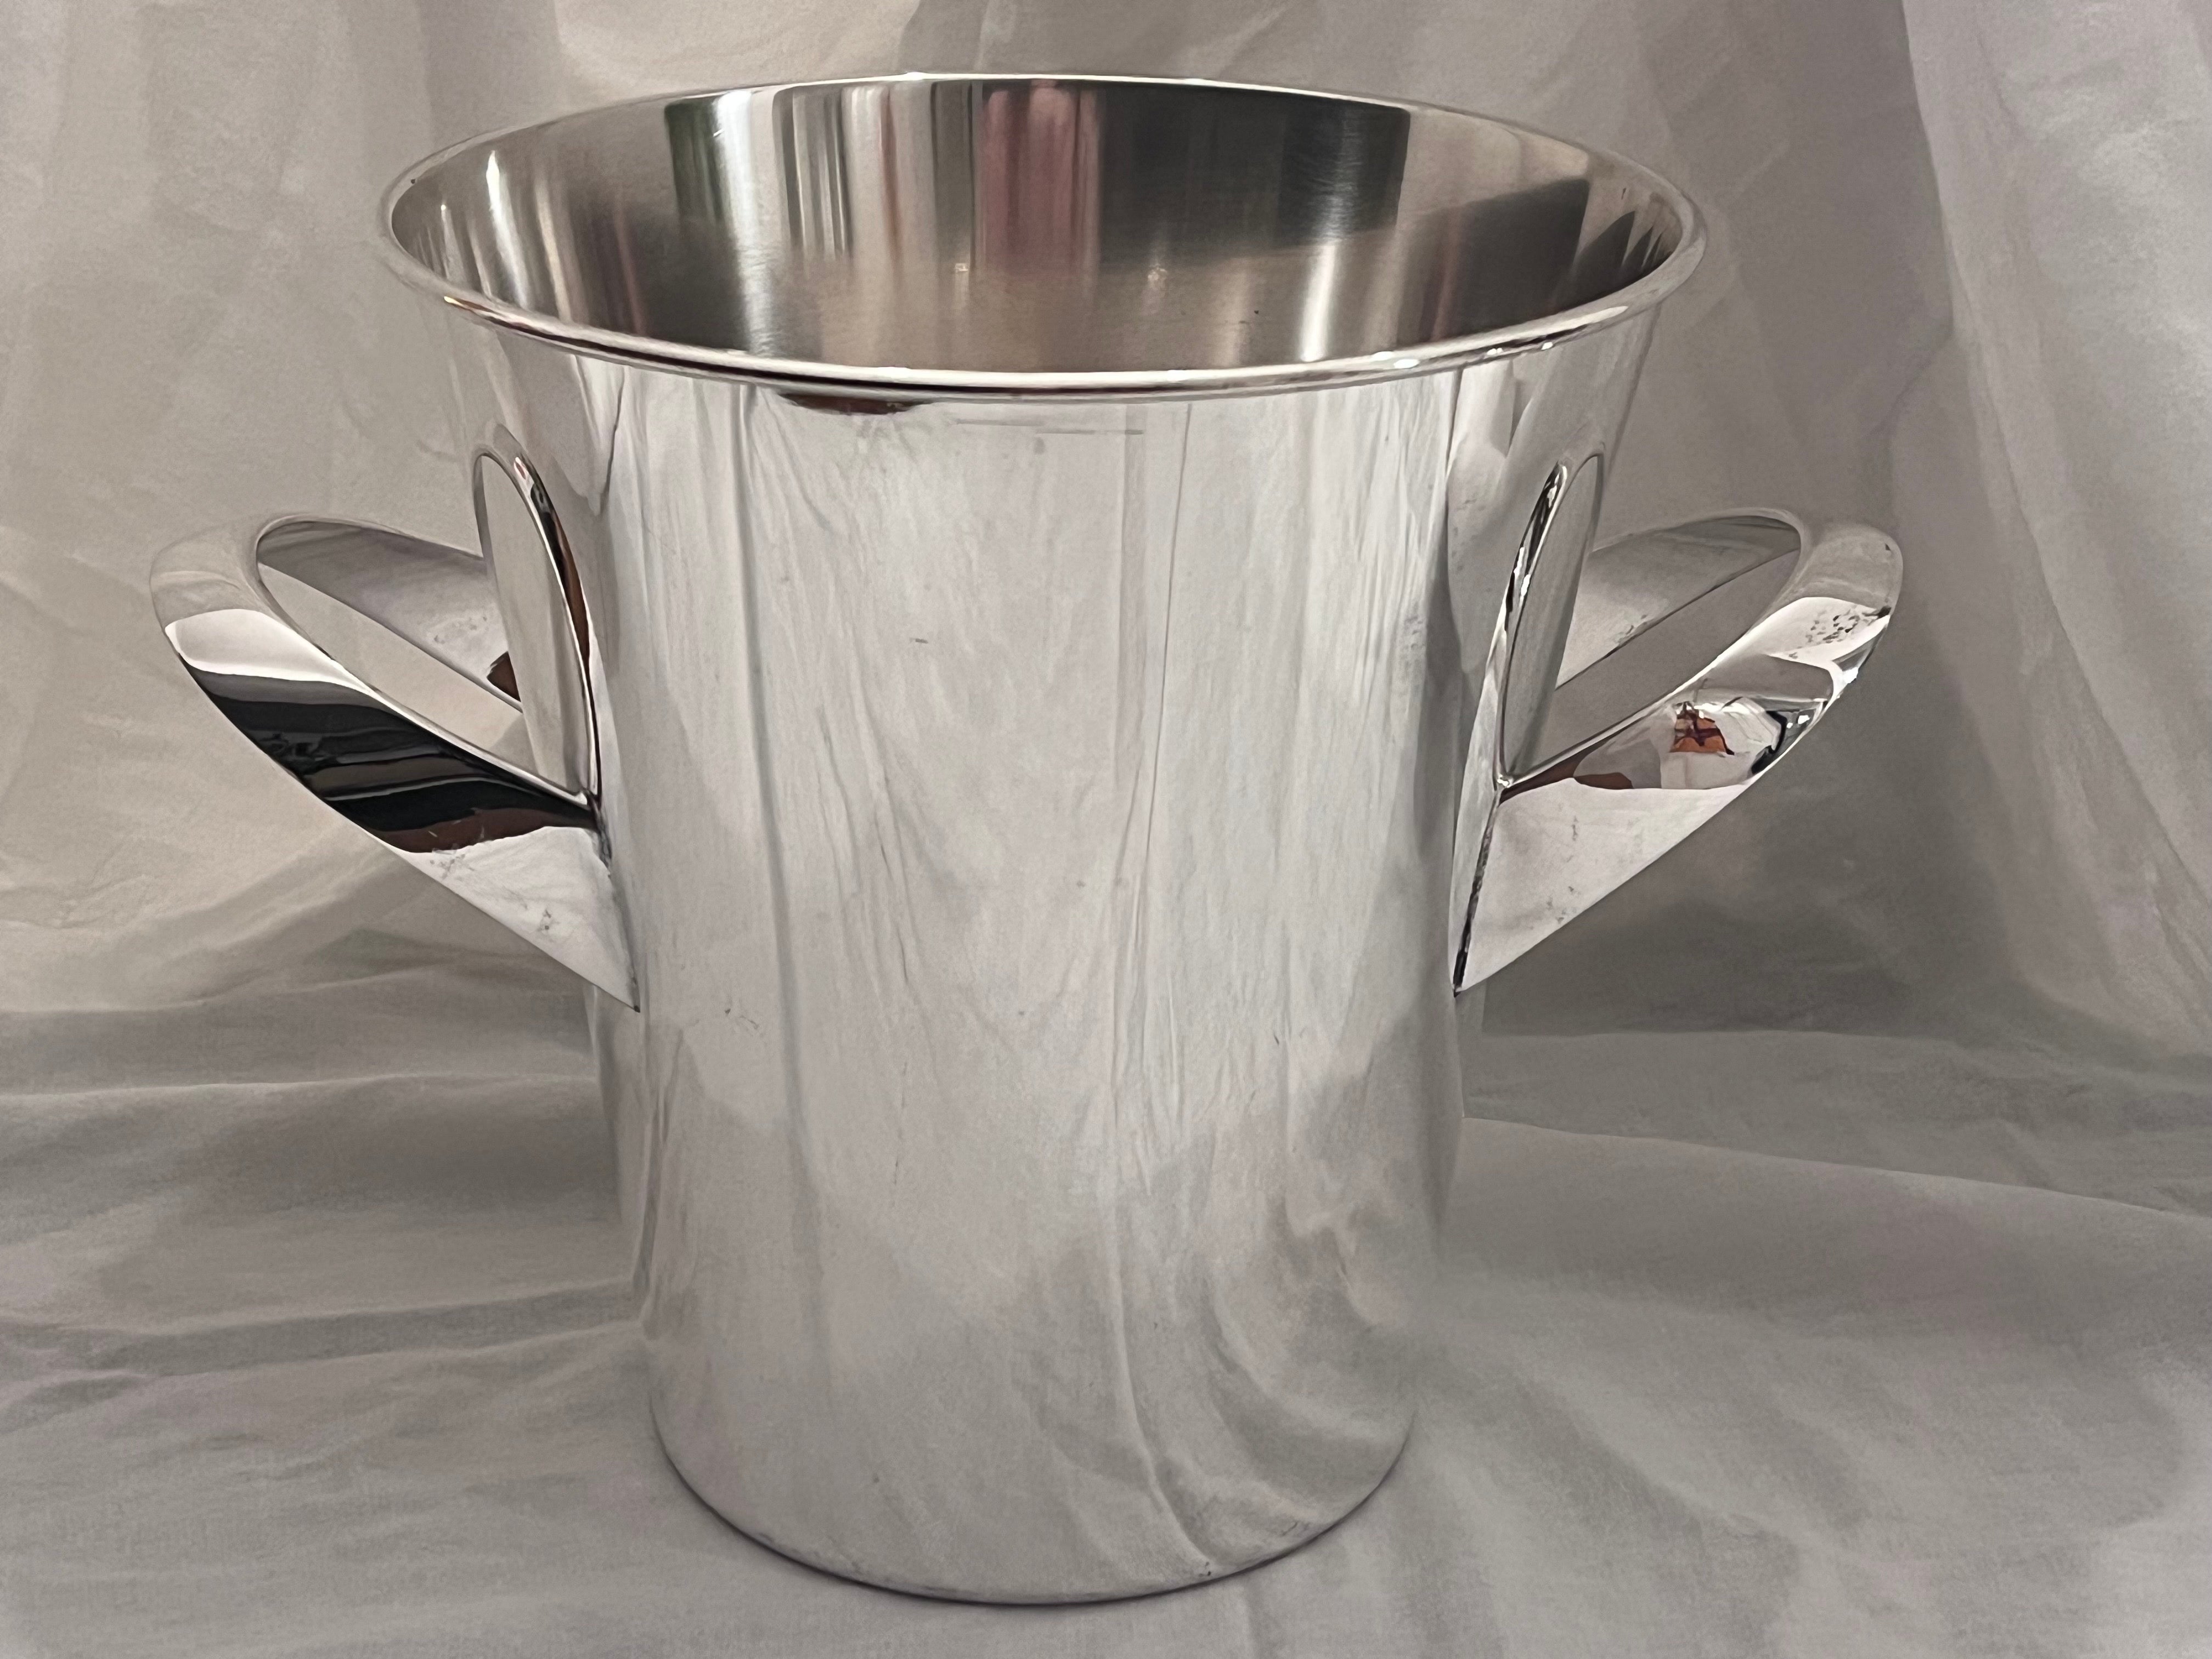 A mid century era, circa 1950's champagne or wine bucket in silver plate designed by Kurt Mayer for WMF. Württembergische Metallwarenfabrik was established sometime in the 1880's as previous iterations of the predecessor companies were joined. In